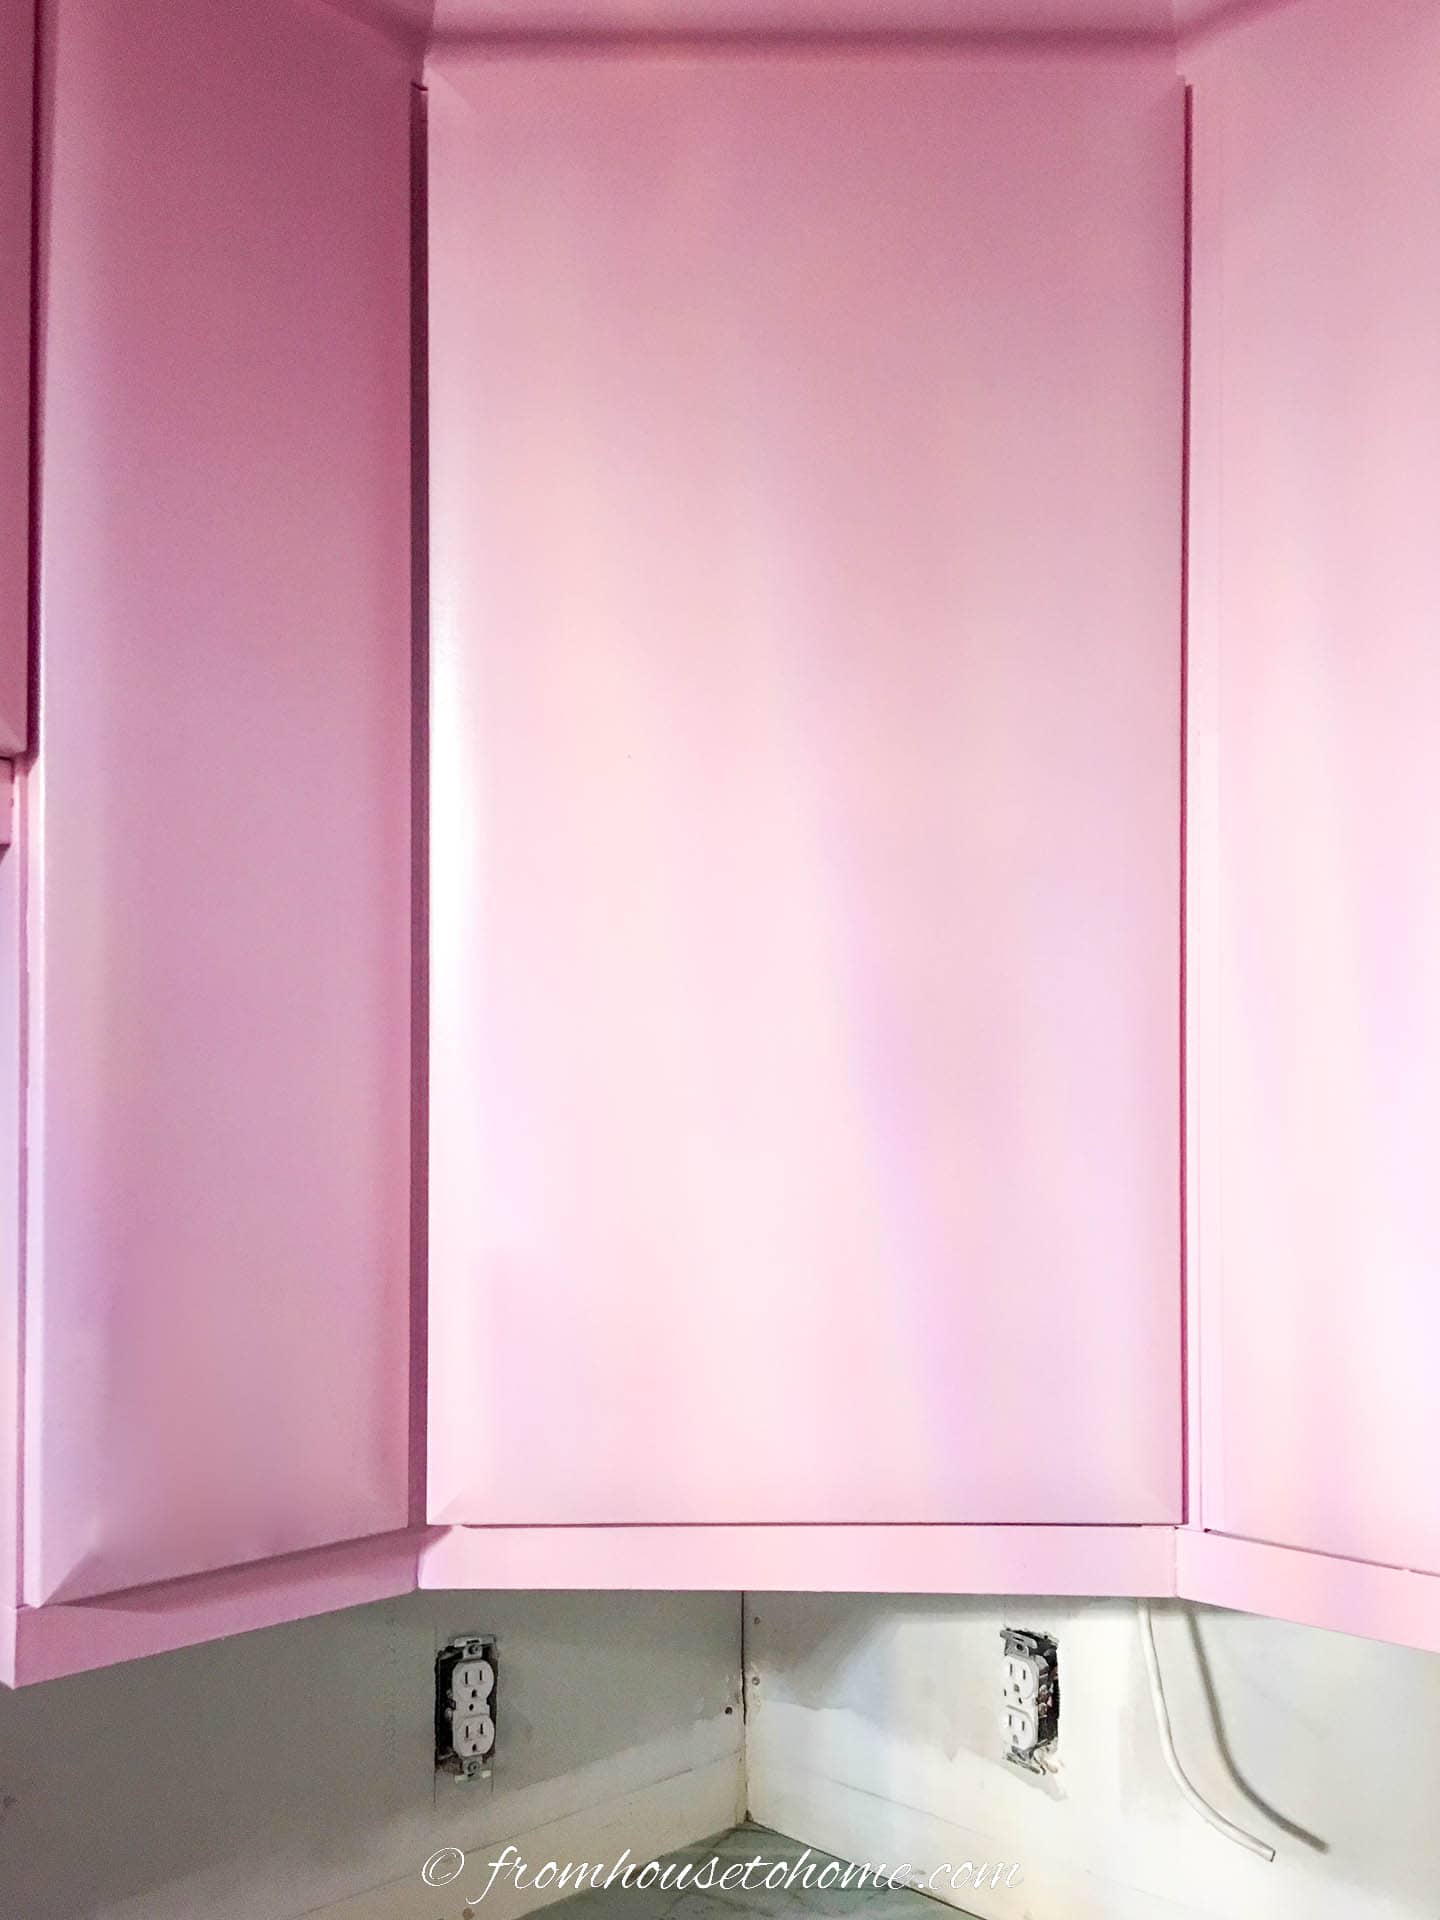 The top kitchen cabinet doors painted light pink (Sherwin Williams 'Irresistible')